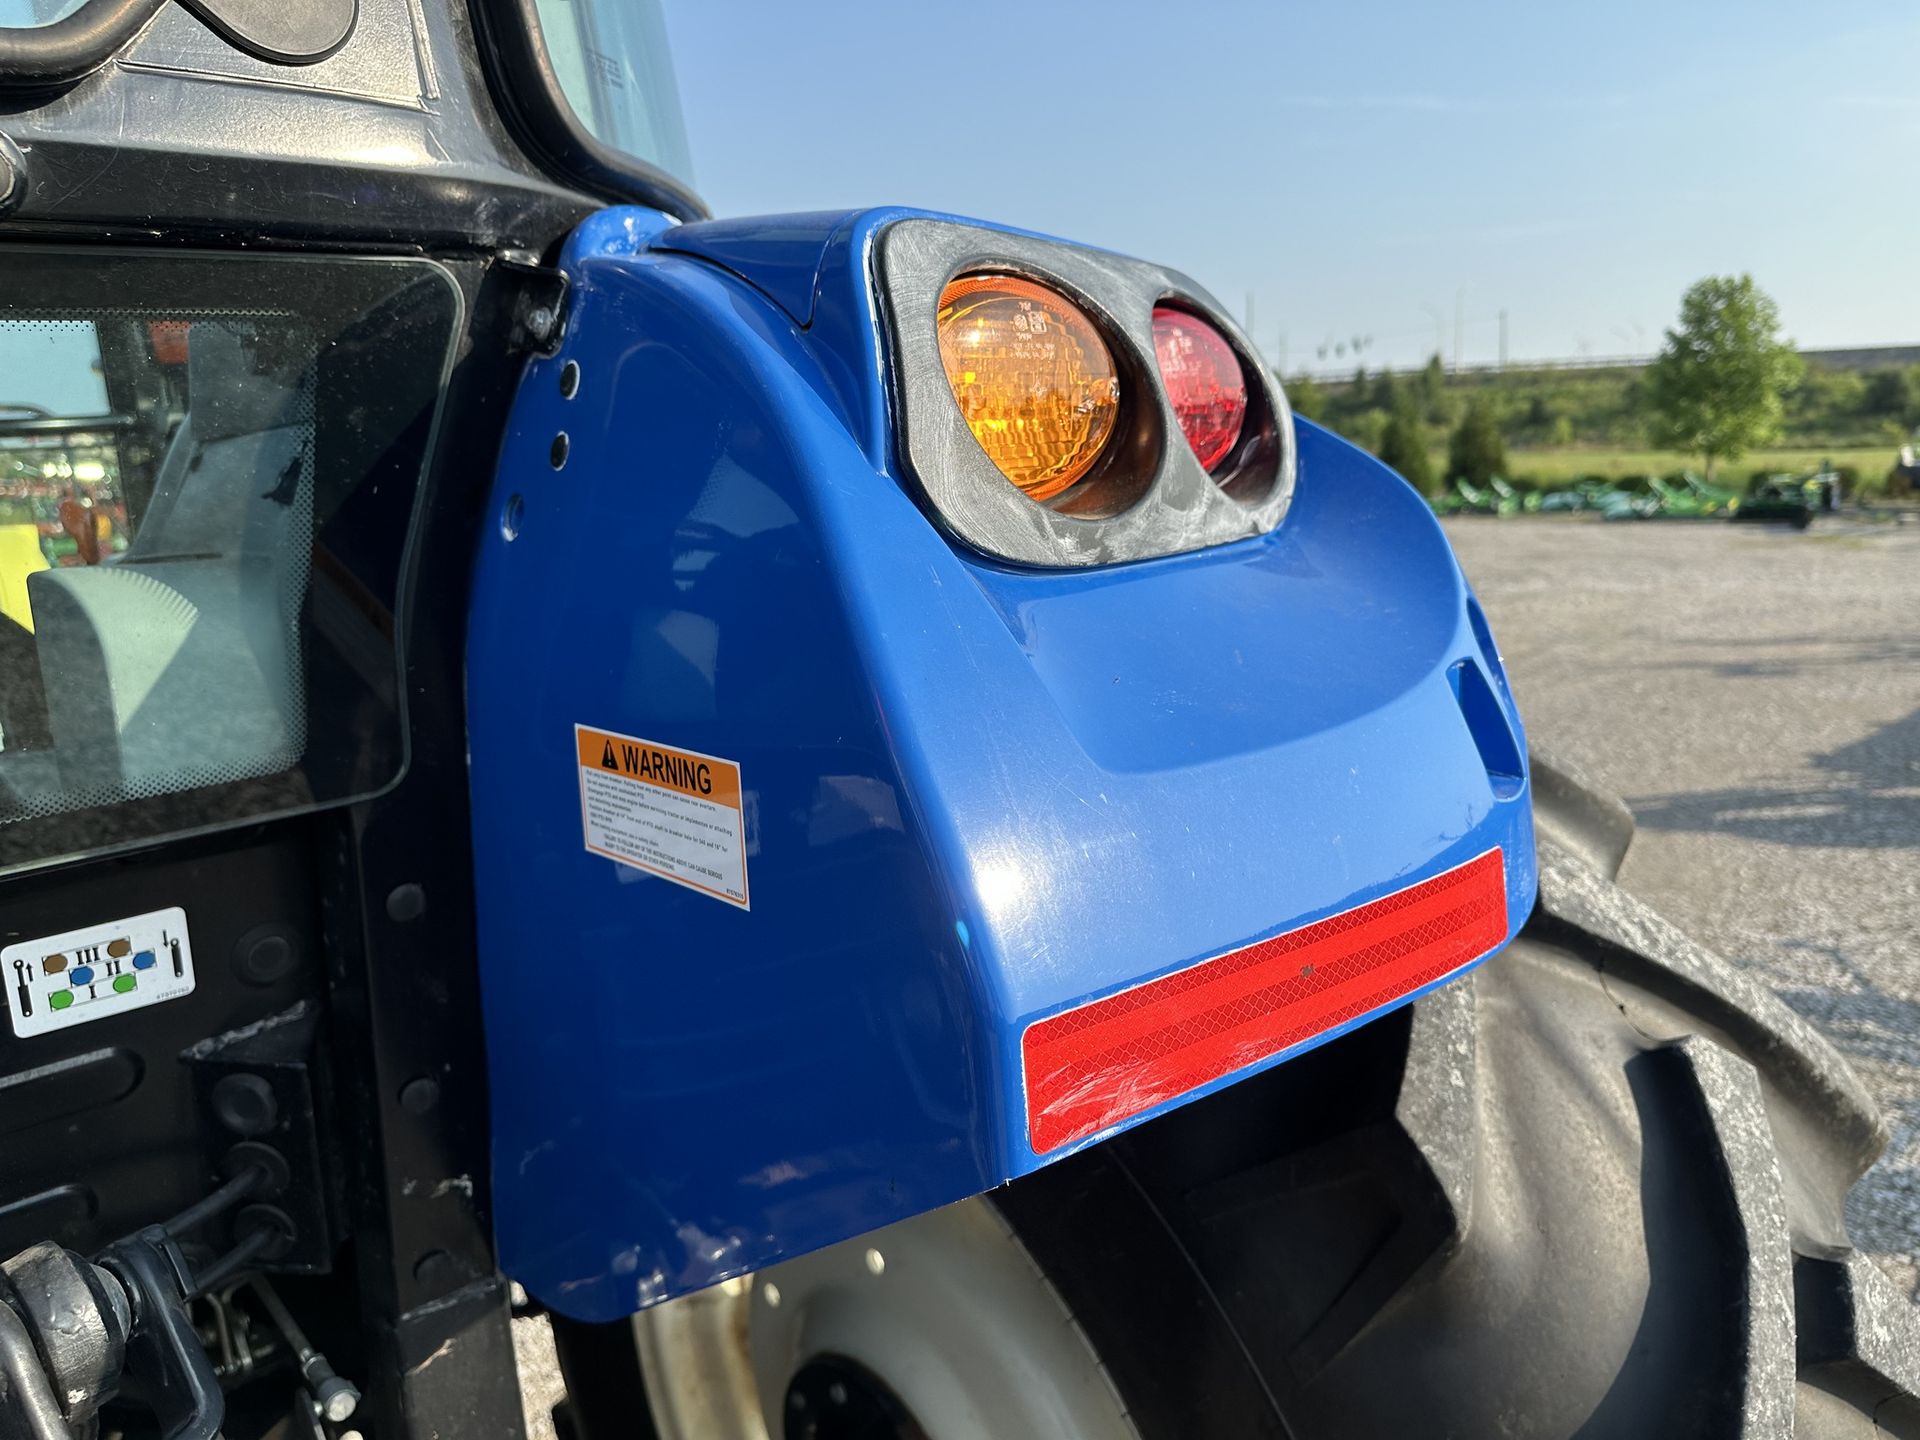 2015 New Holland T4.90